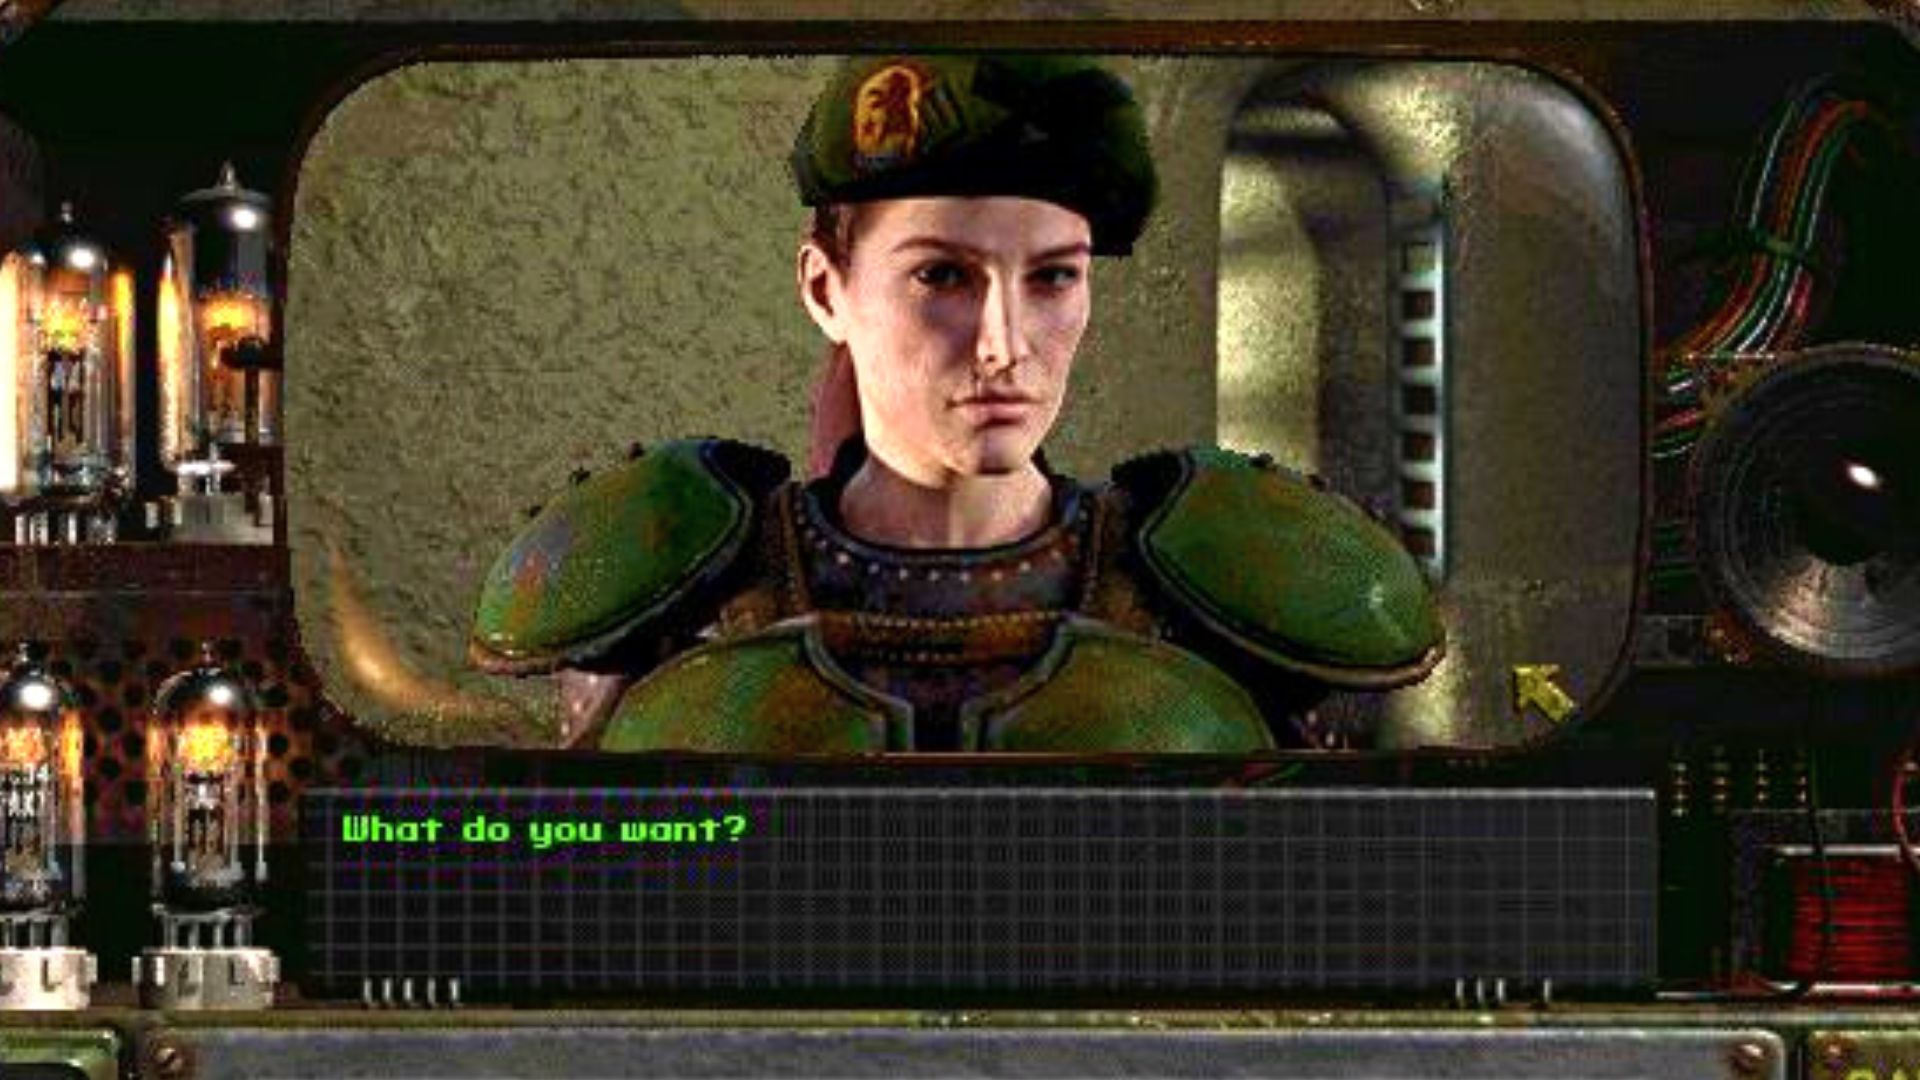 Fallout 2 has 13 voiced characters – modders are expanding that by 10x